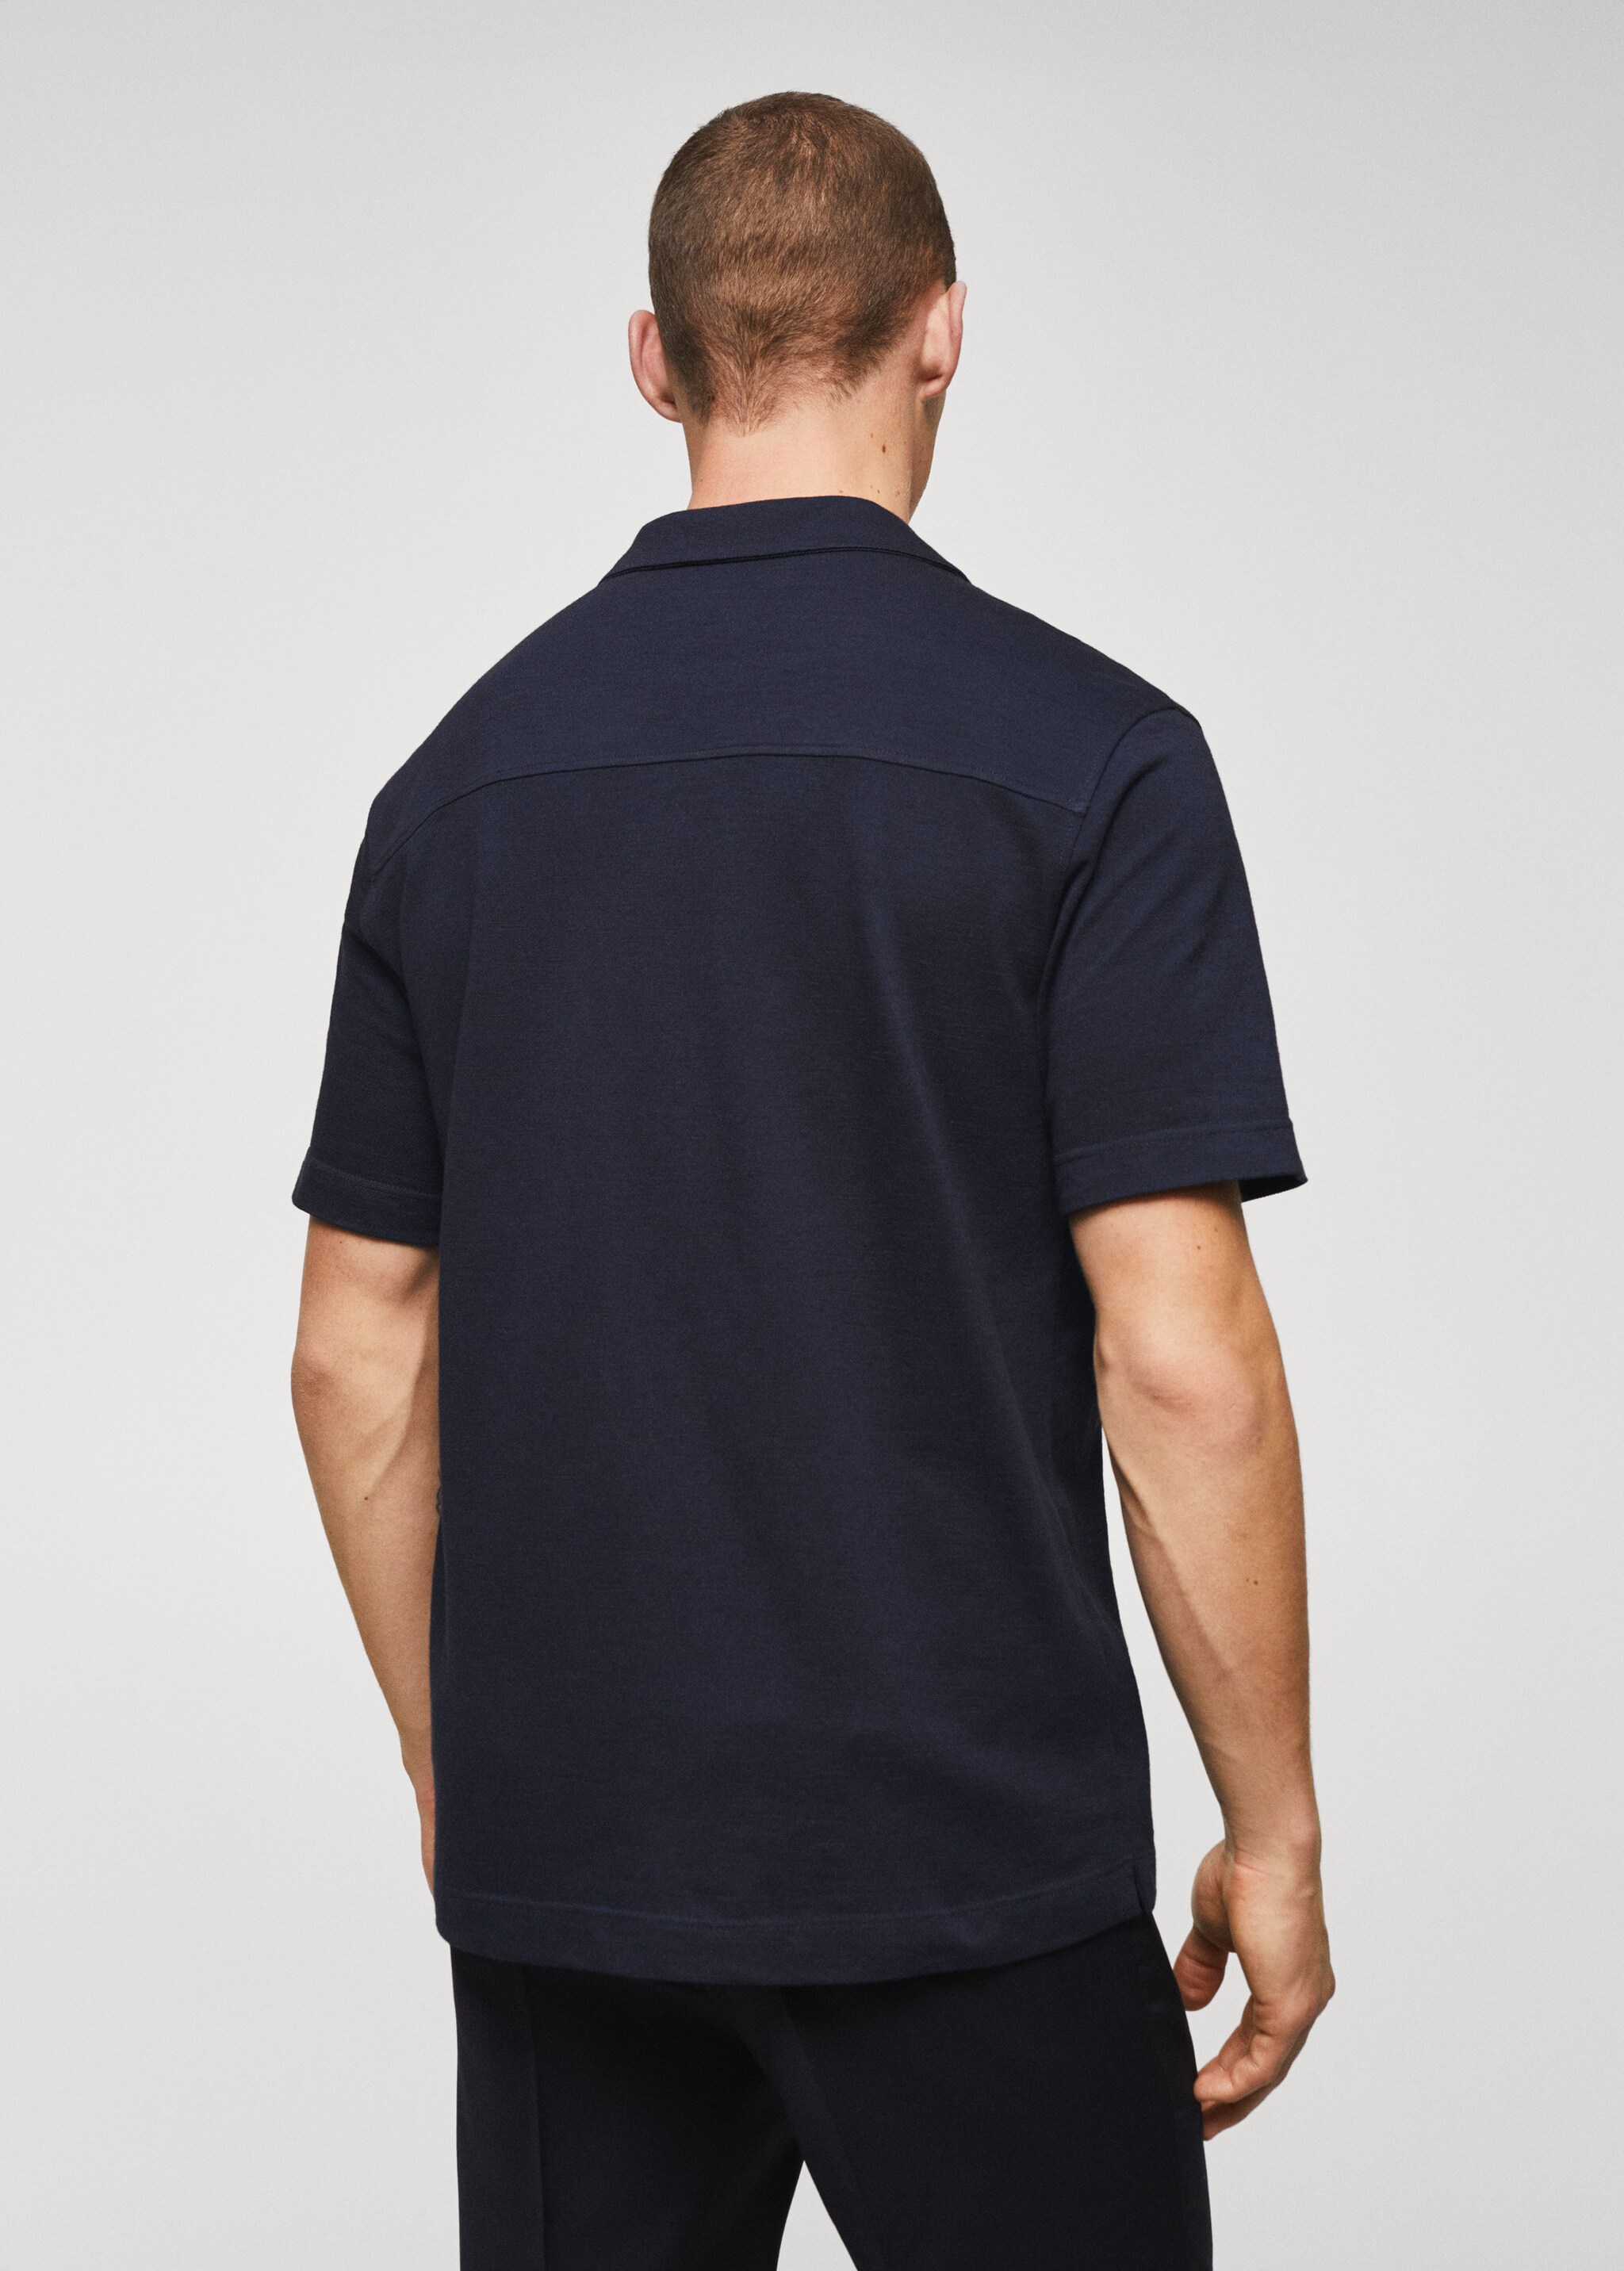 Bowling-collar pique shirt - Reverse of the article